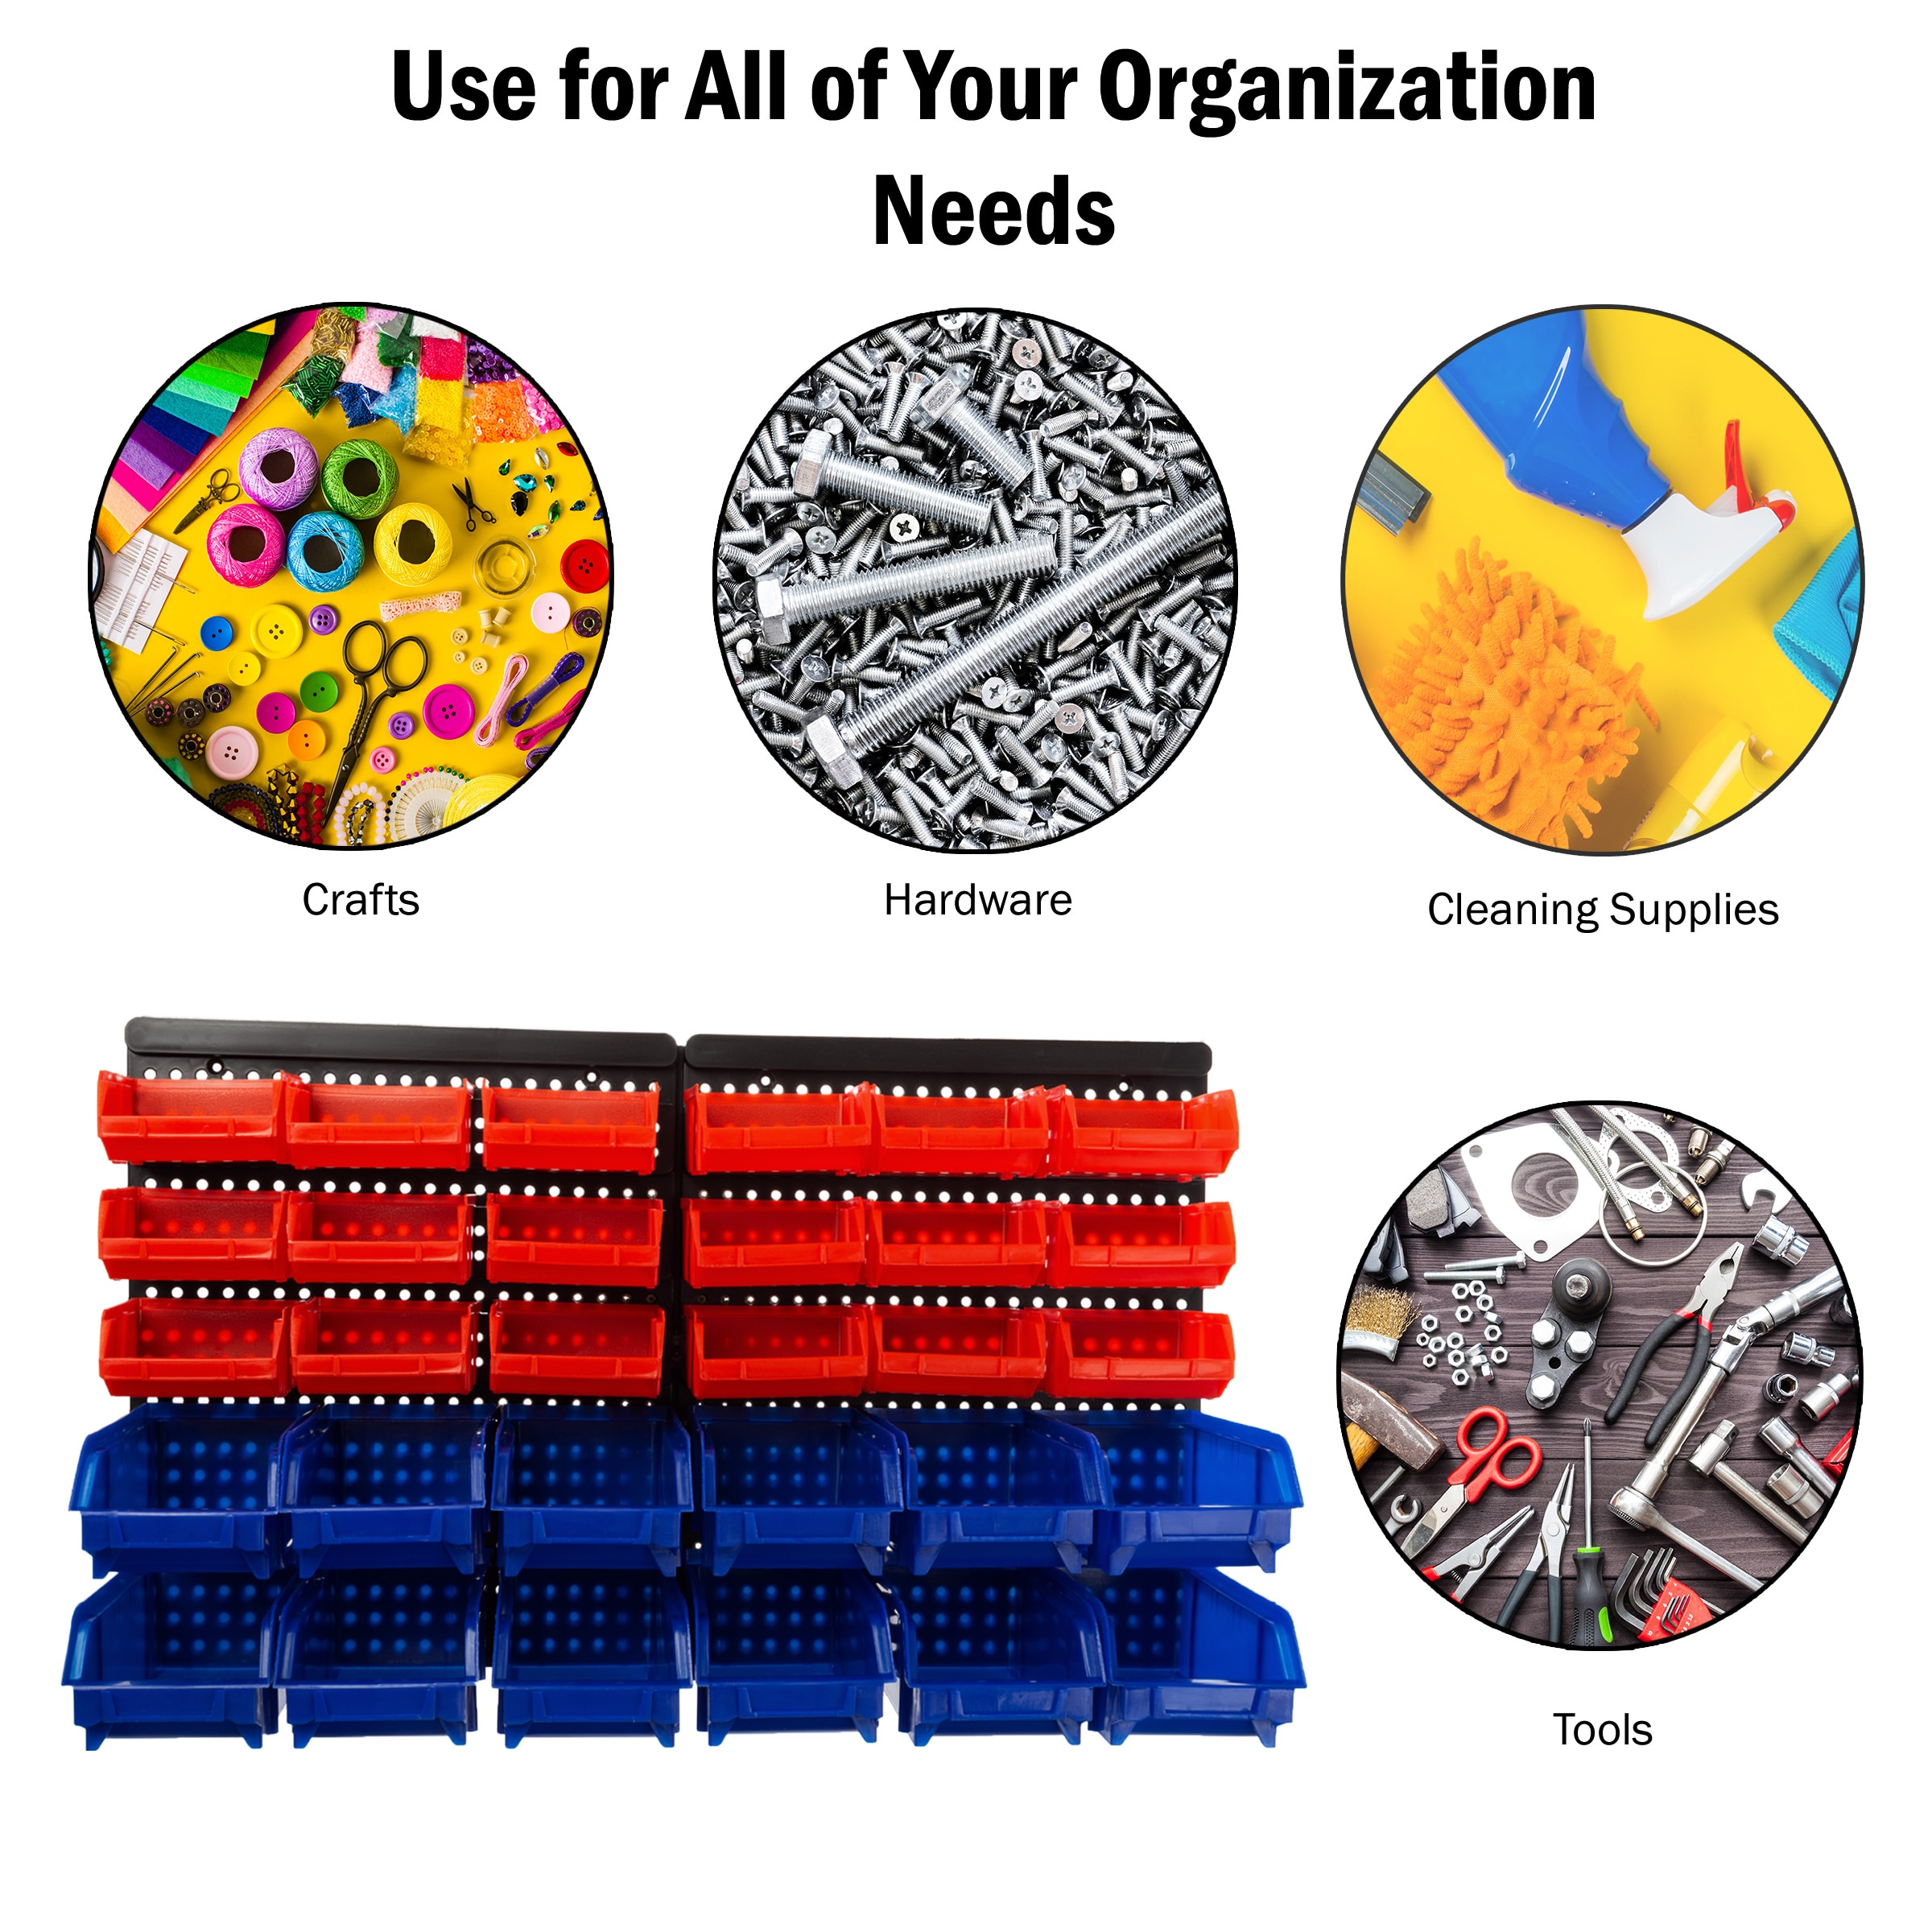 Fleming Supply 30-Compartment Plastic Small Parts Organizer in the